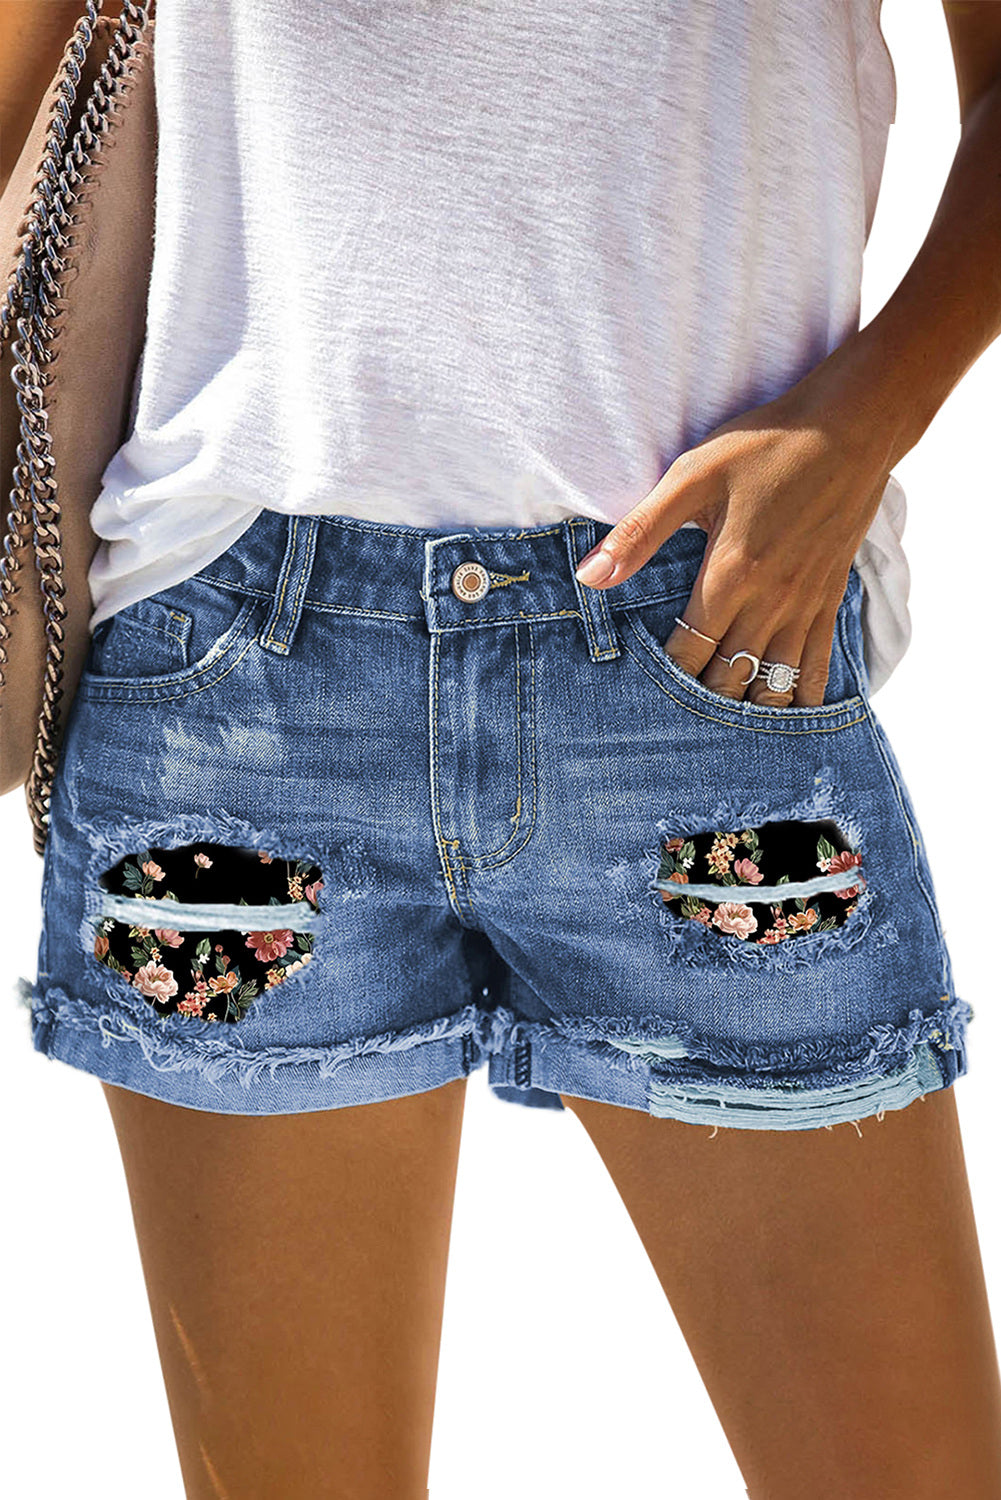 Sky Blue Denim Shorts Sexy Casual Summer Shorts Mid Rise Distressed Shorts LC7831020-604